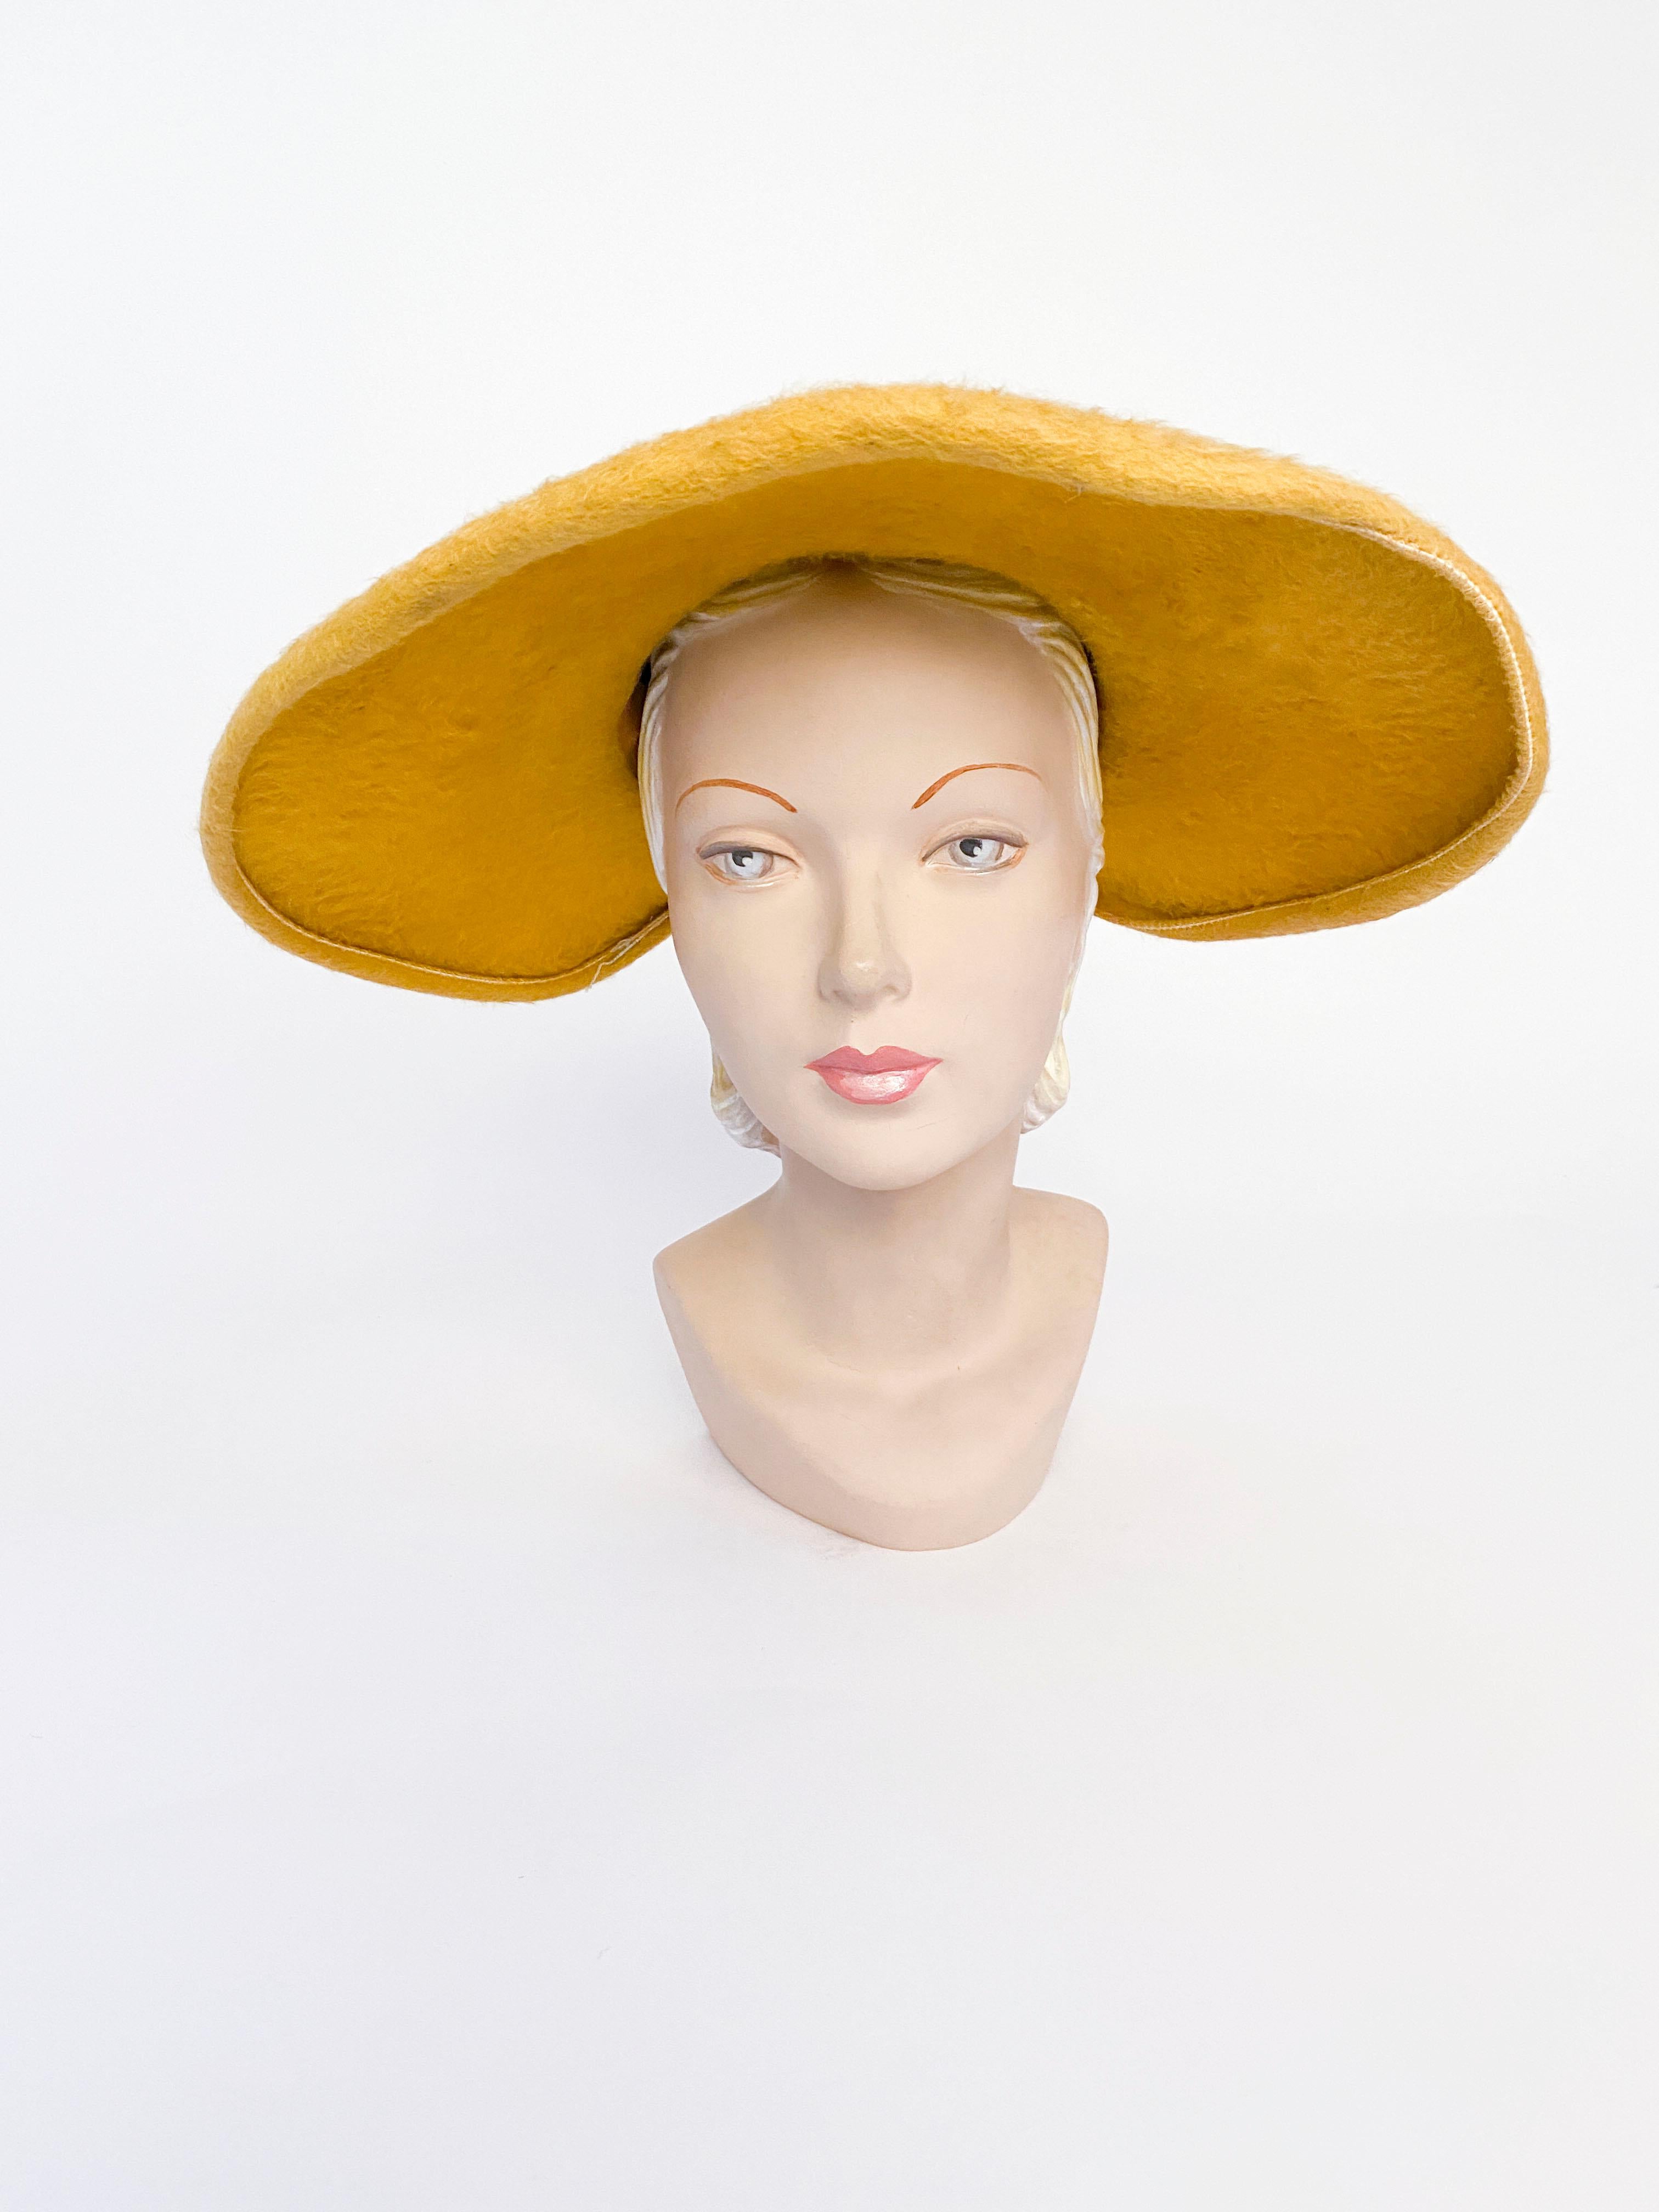 1950s mustard yellow beaver fur felt hat finished with a handmade cord and pearl hat band that ends to a decorative bow and tails extending over the wide brim. The brim is fully wired and there is an inner attached elastic hat band worn on the back